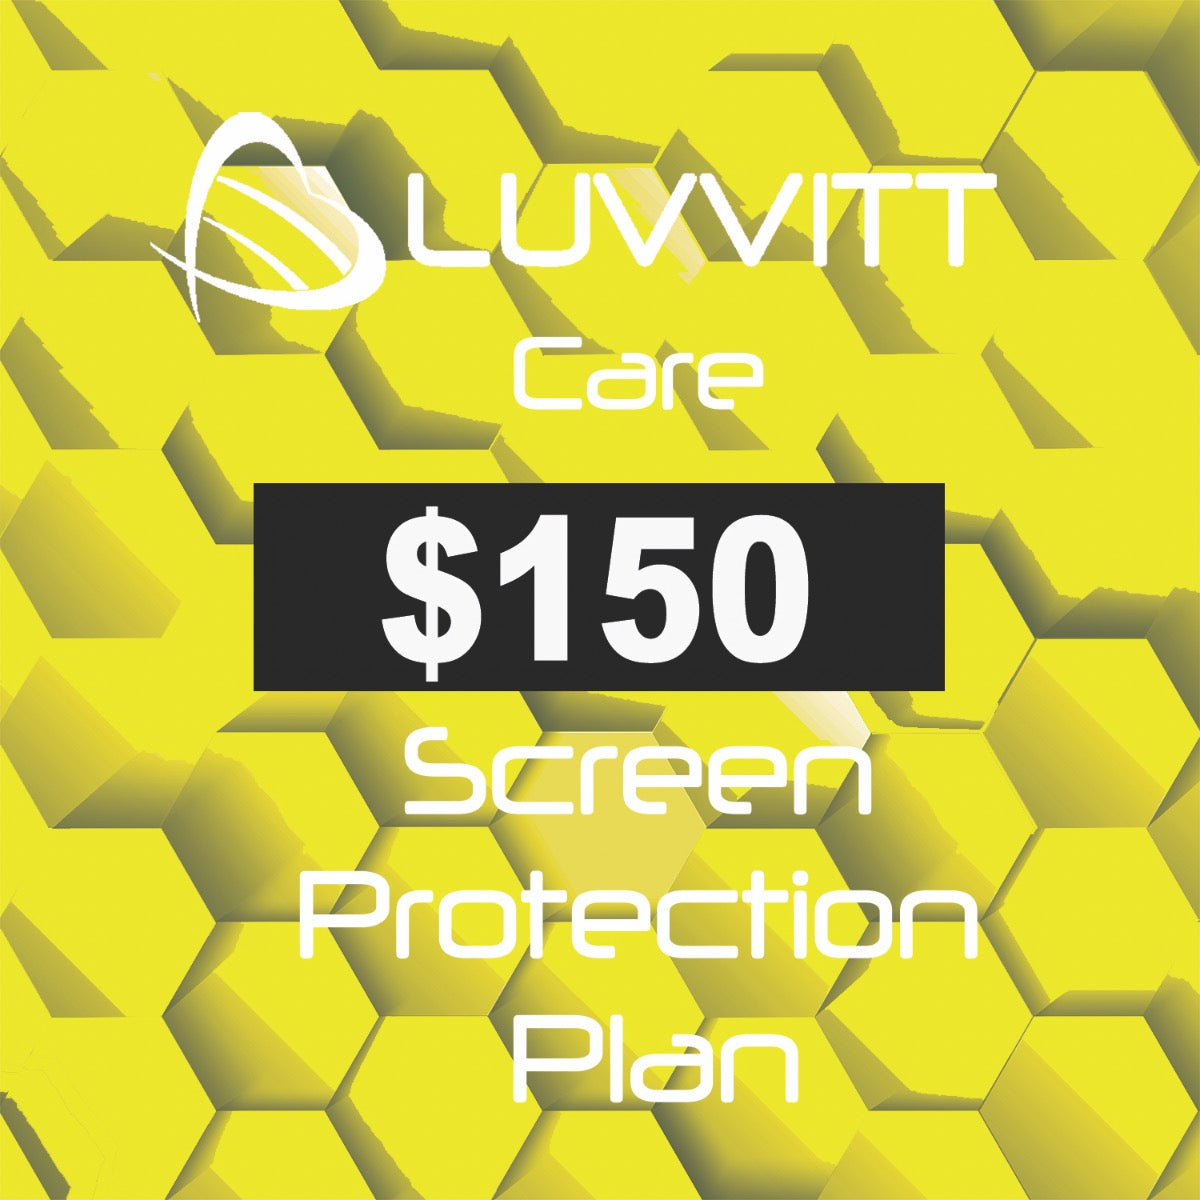 Luvvitt Care $150 Screen Protection Coverage for all Mobile Devices